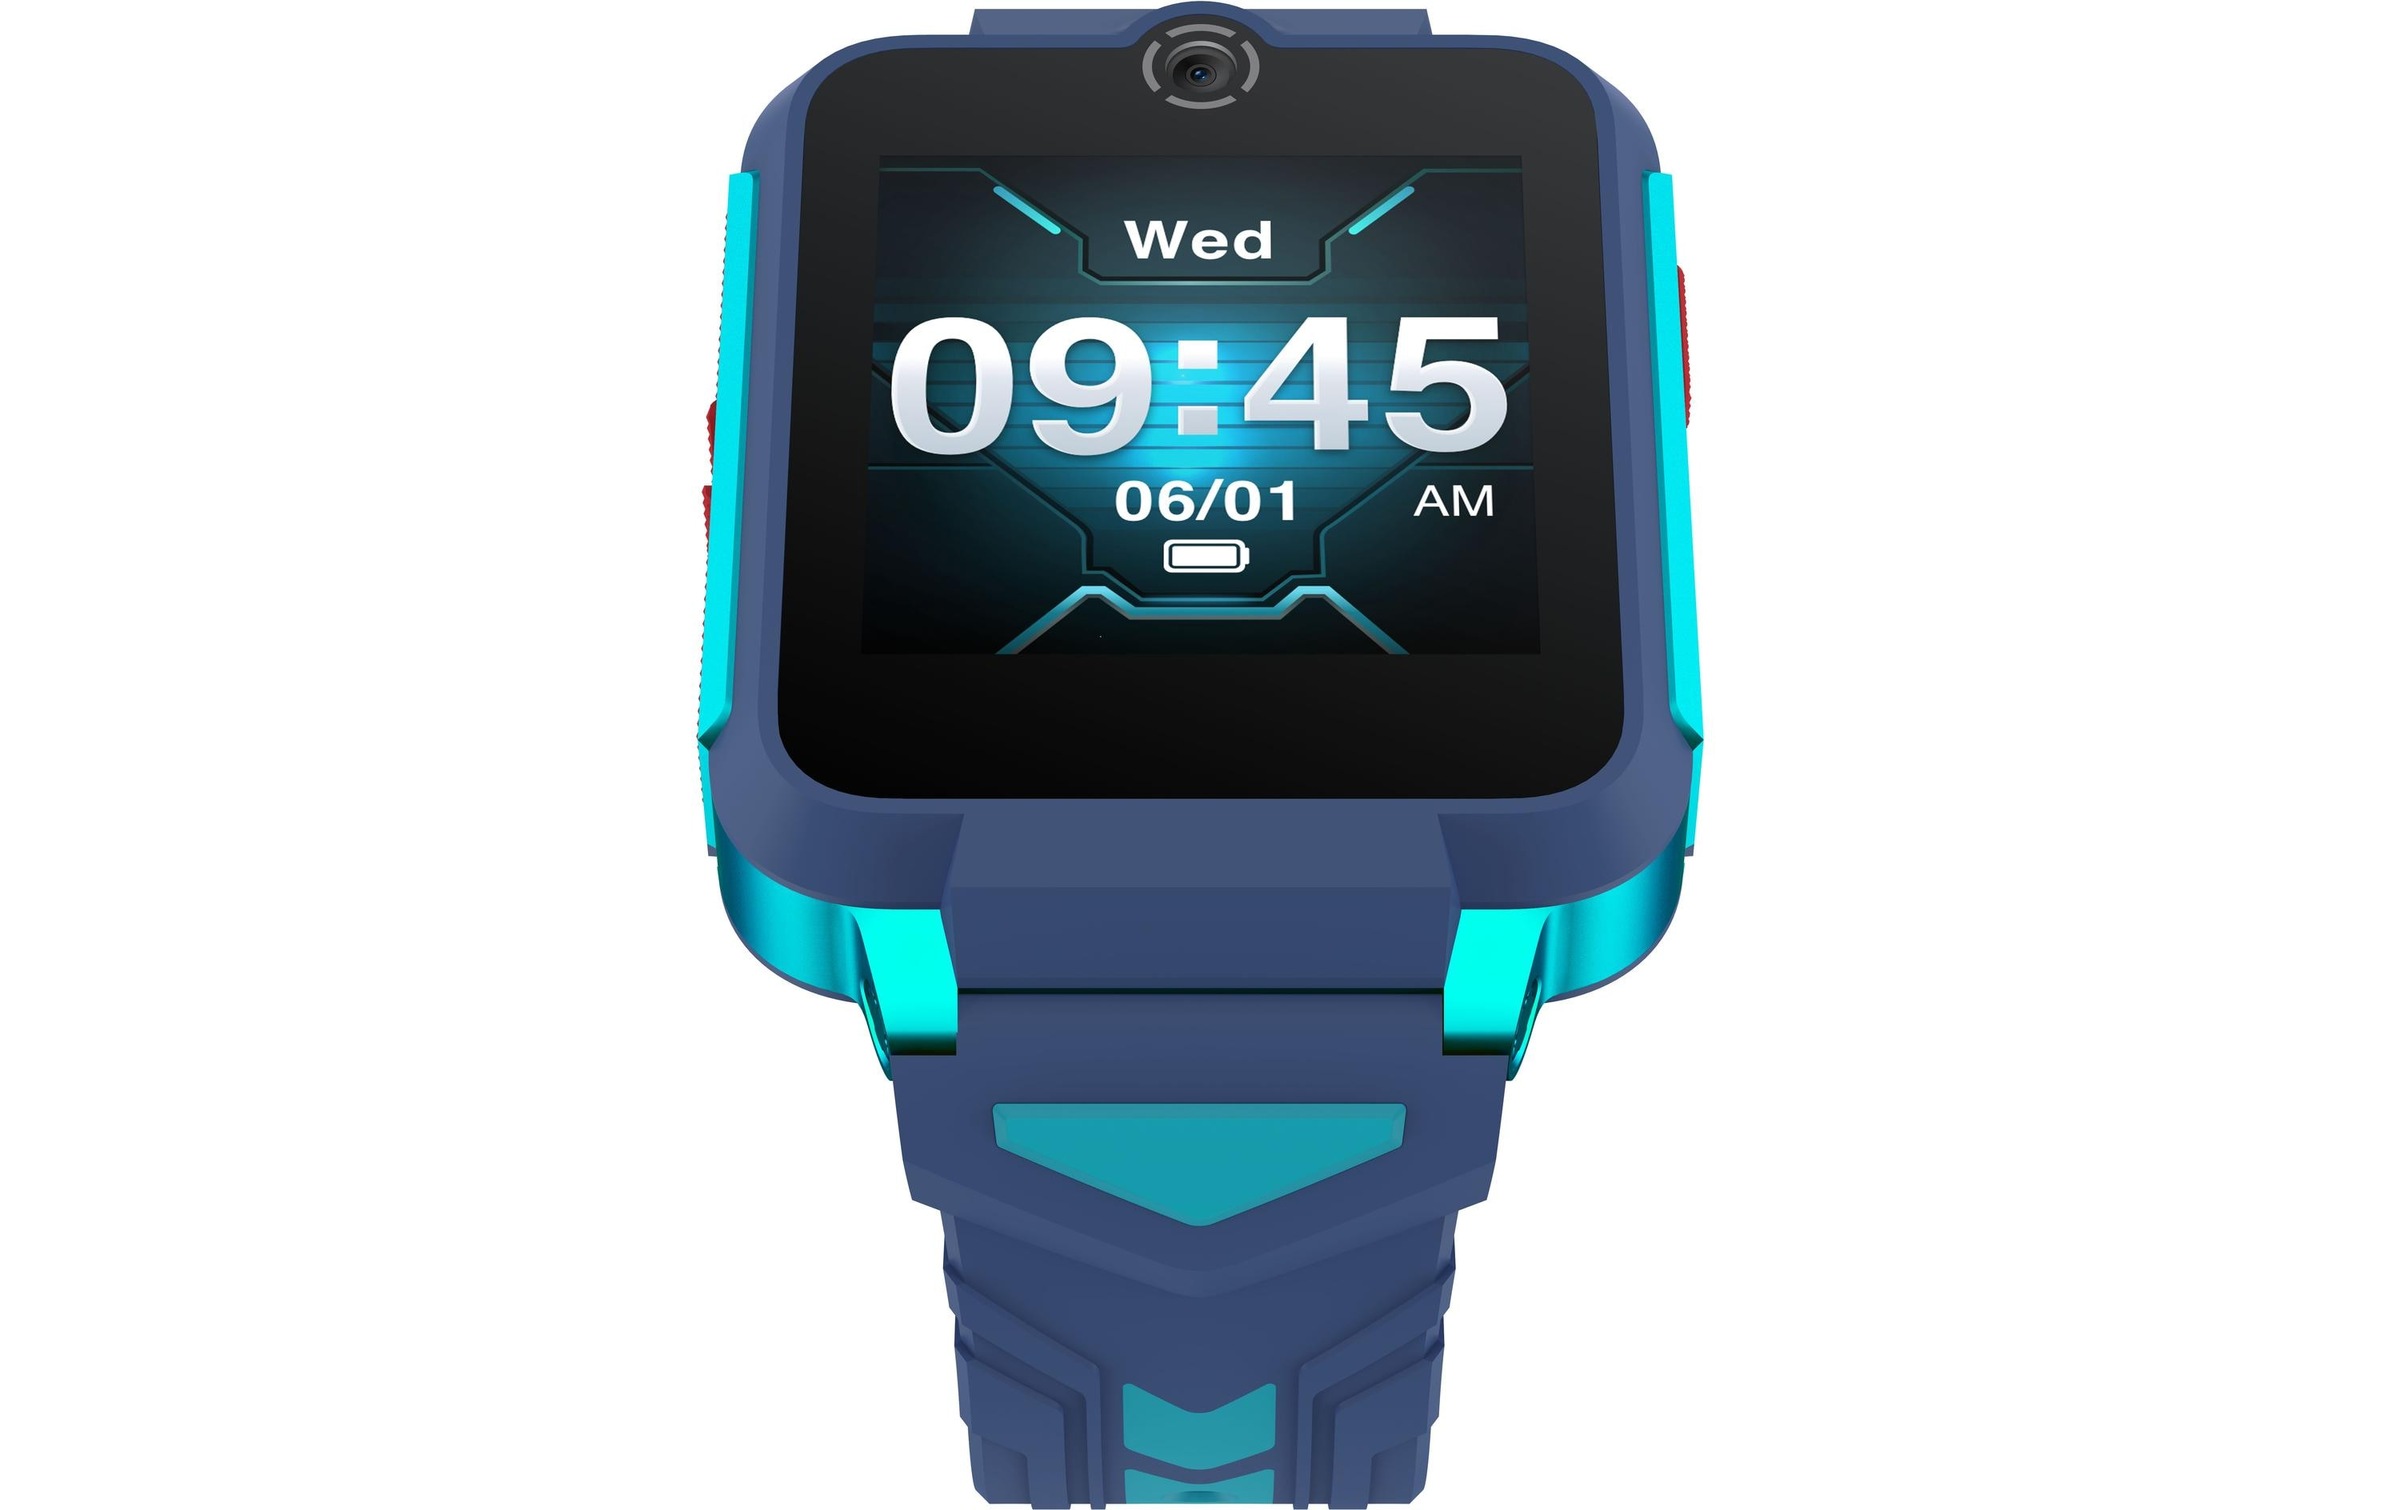 TCL Smartwatch »MOVETIME Family Watch«